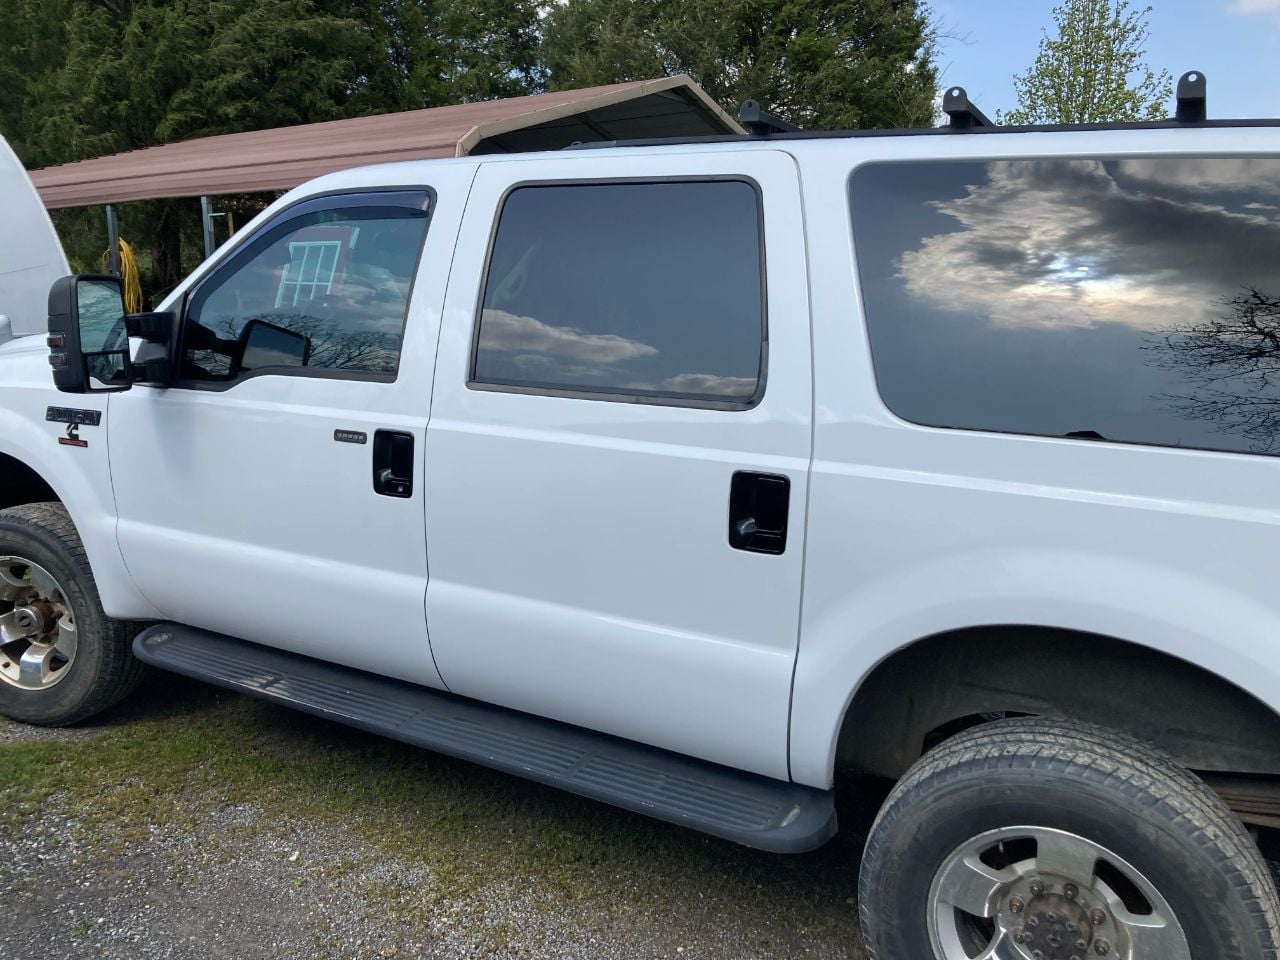 2000 Ford Excursion - 2000 Excursion with Cummins Swap - Used - VIN 1FMNU43S2YEB26112 - 6 cyl - 4WD - Automatic - SUV - White - Knoxville, TN 37901, United States